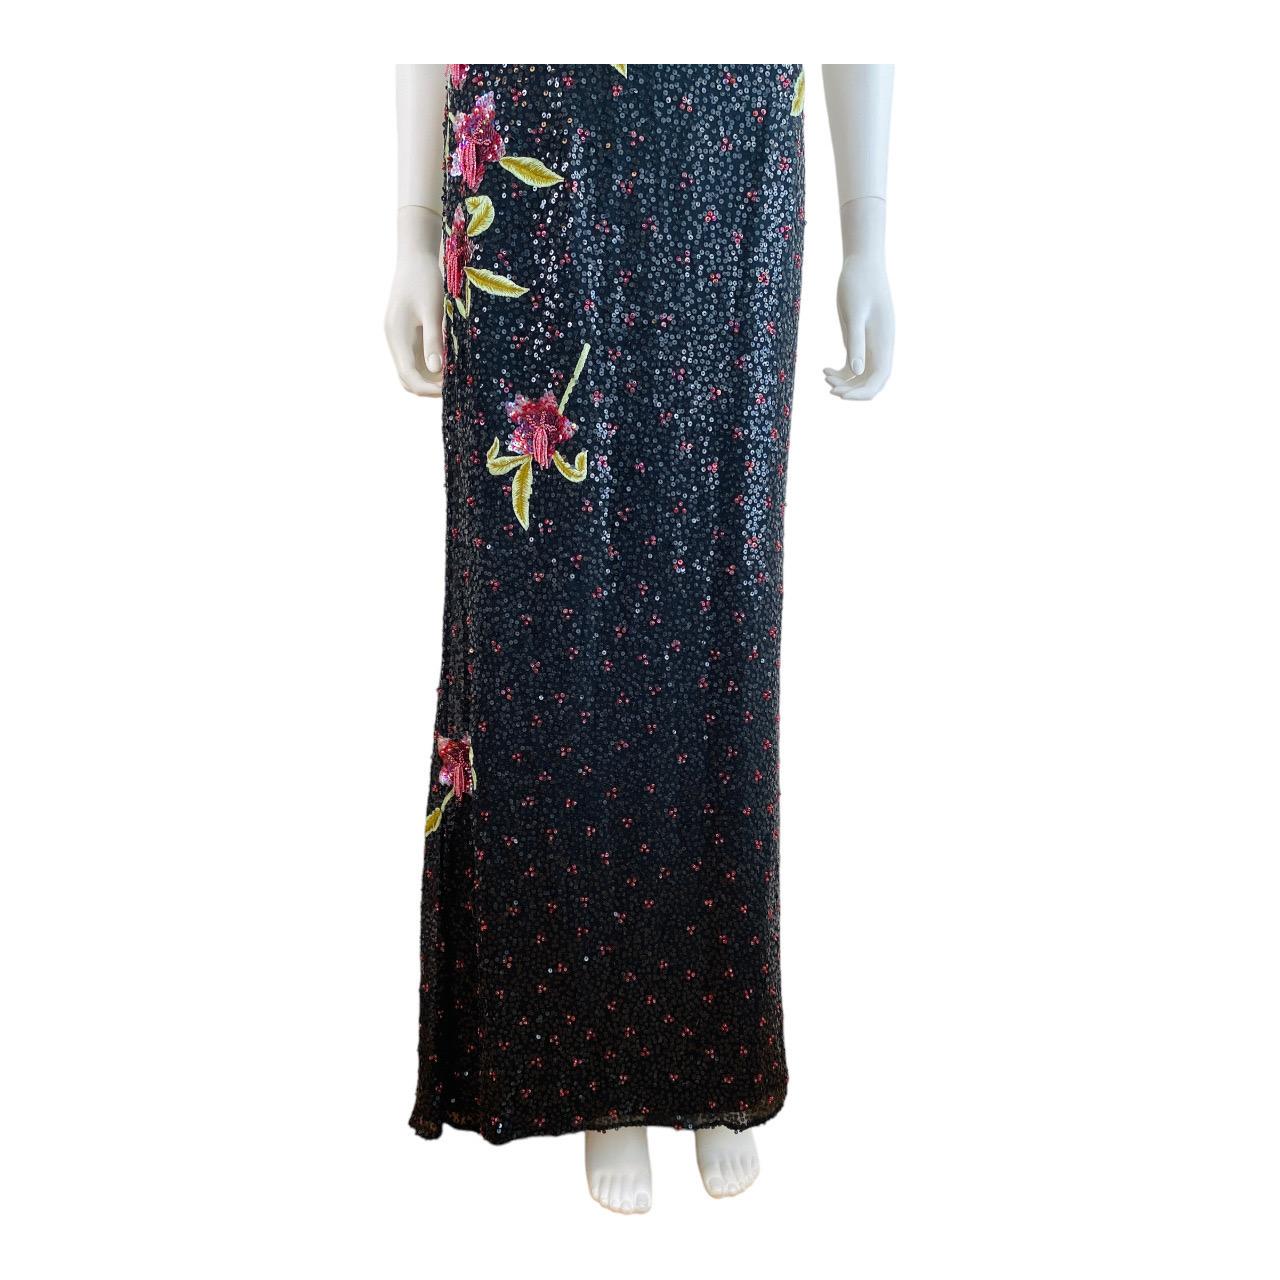 Vintage 2002 Escada Hand Beaded Sequin Floral Maxi Dress Gown Black Pink Flowers 1